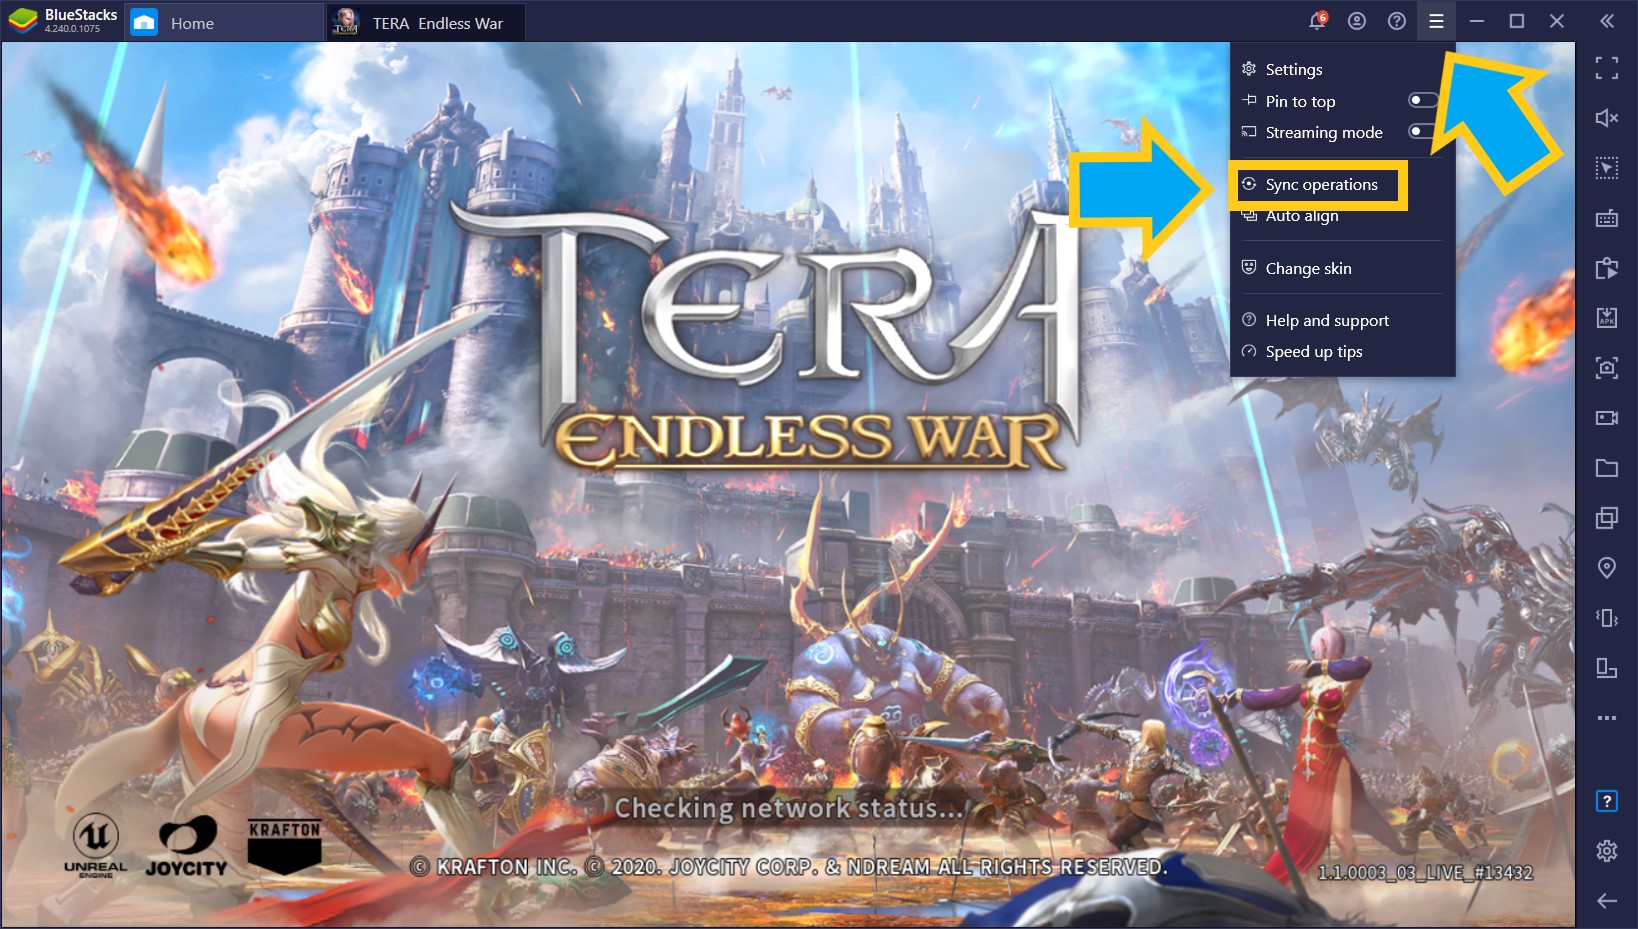 TERA: Endless War on PC – Tips and Tricks for Using BlueStacks to Automate and Improve Your Performance